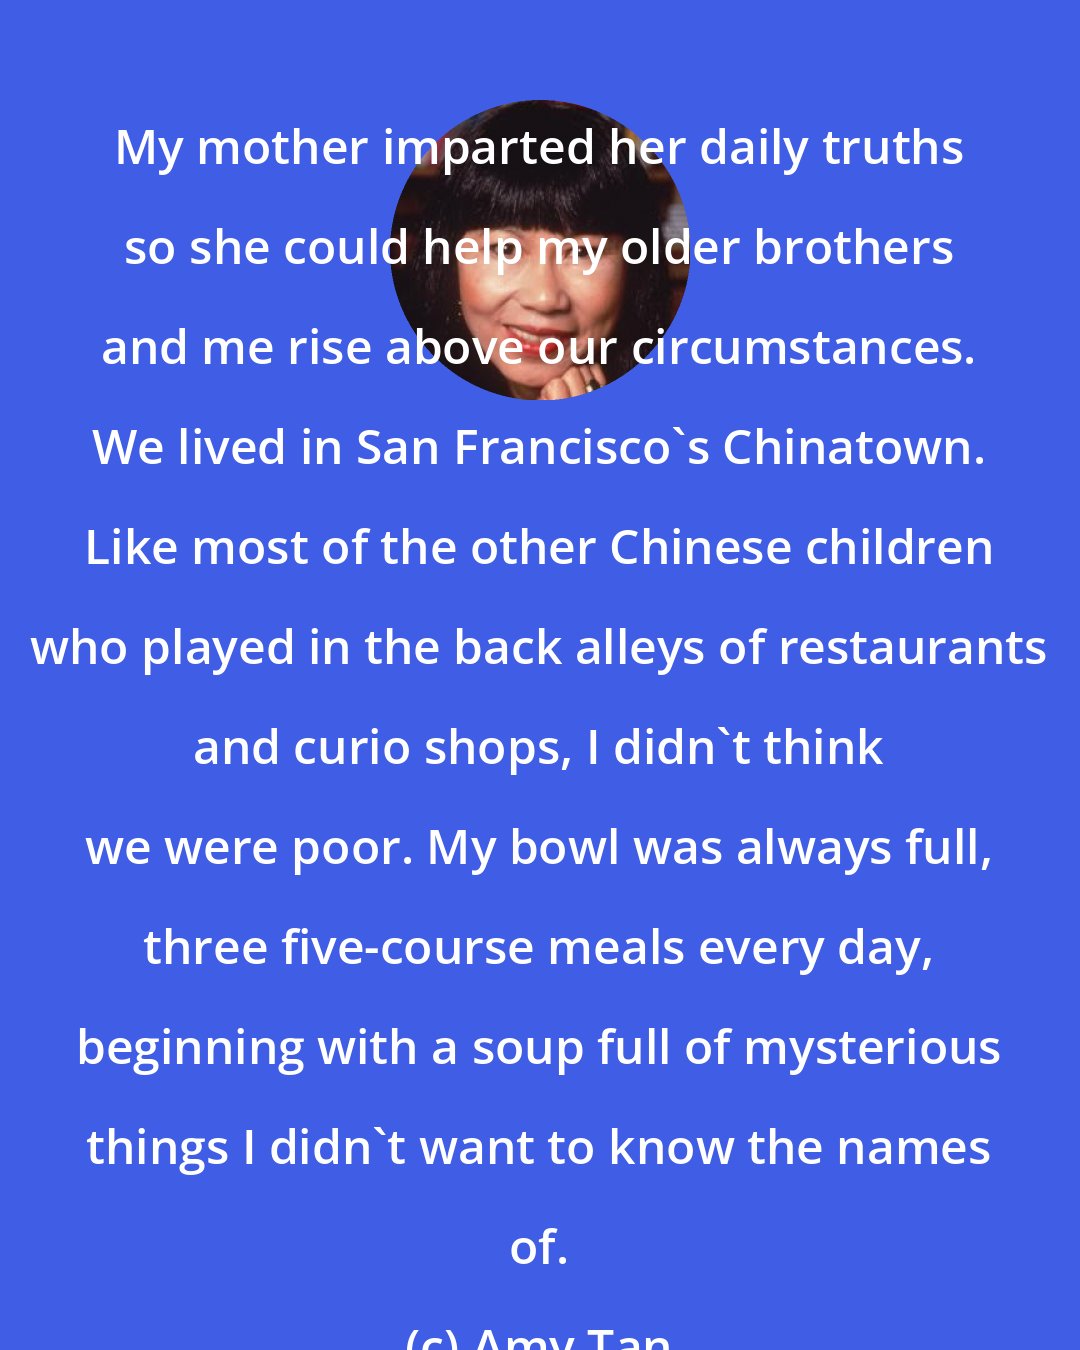 Amy Tan: My mother imparted her daily truths so she could help my older brothers and me rise above our circumstances. We lived in San Francisco's Chinatown. Like most of the other Chinese children who played in the back alleys of restaurants and curio shops, I didn't think we were poor. My bowl was always full, three five-course meals every day, beginning with a soup full of mysterious things I didn't want to know the names of.